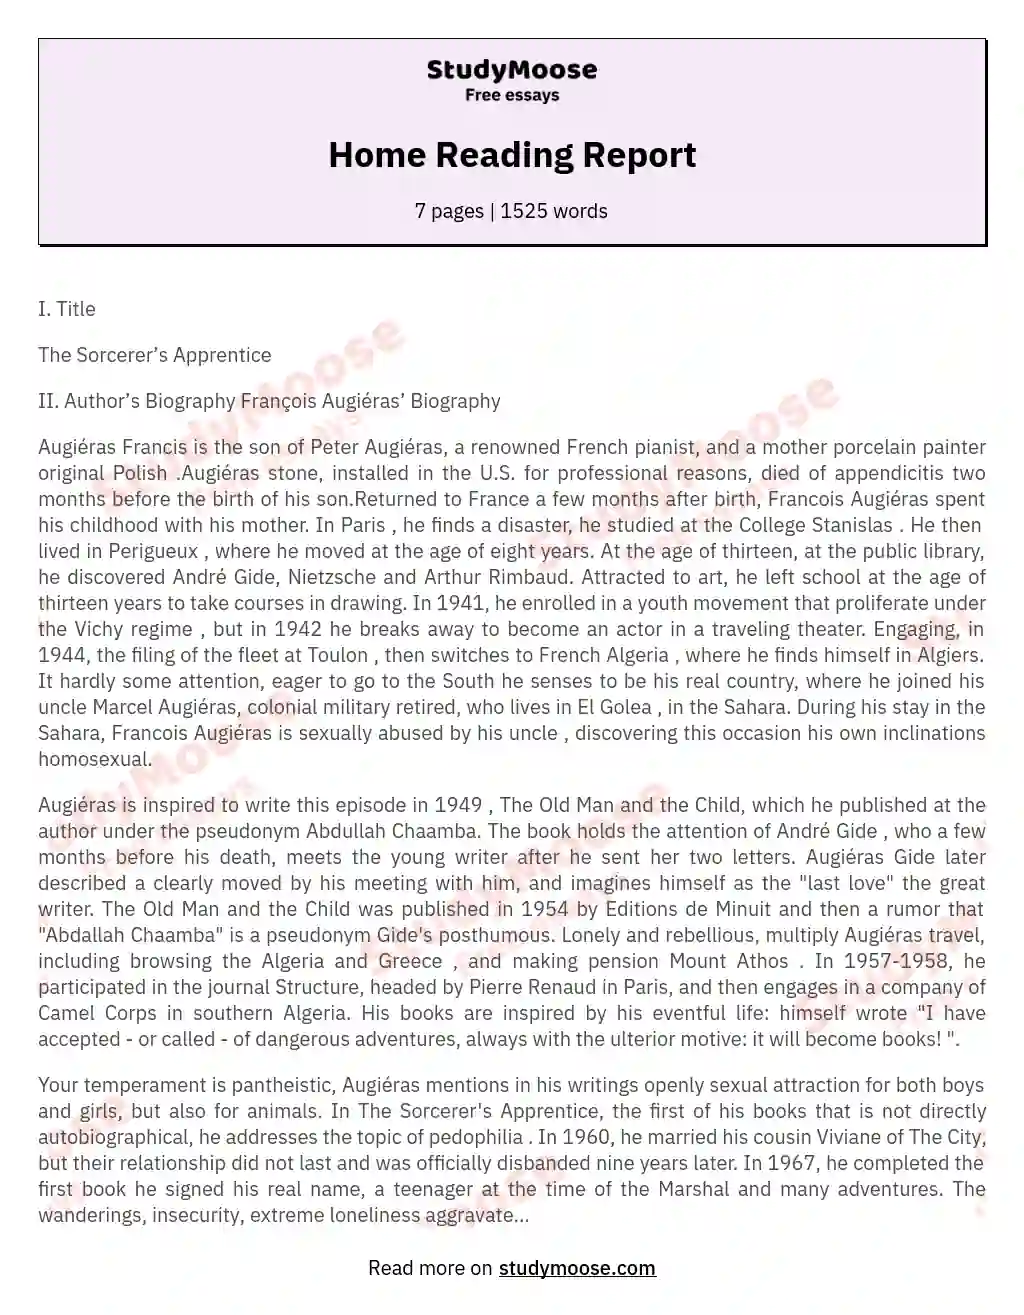 Home Reading Report essay